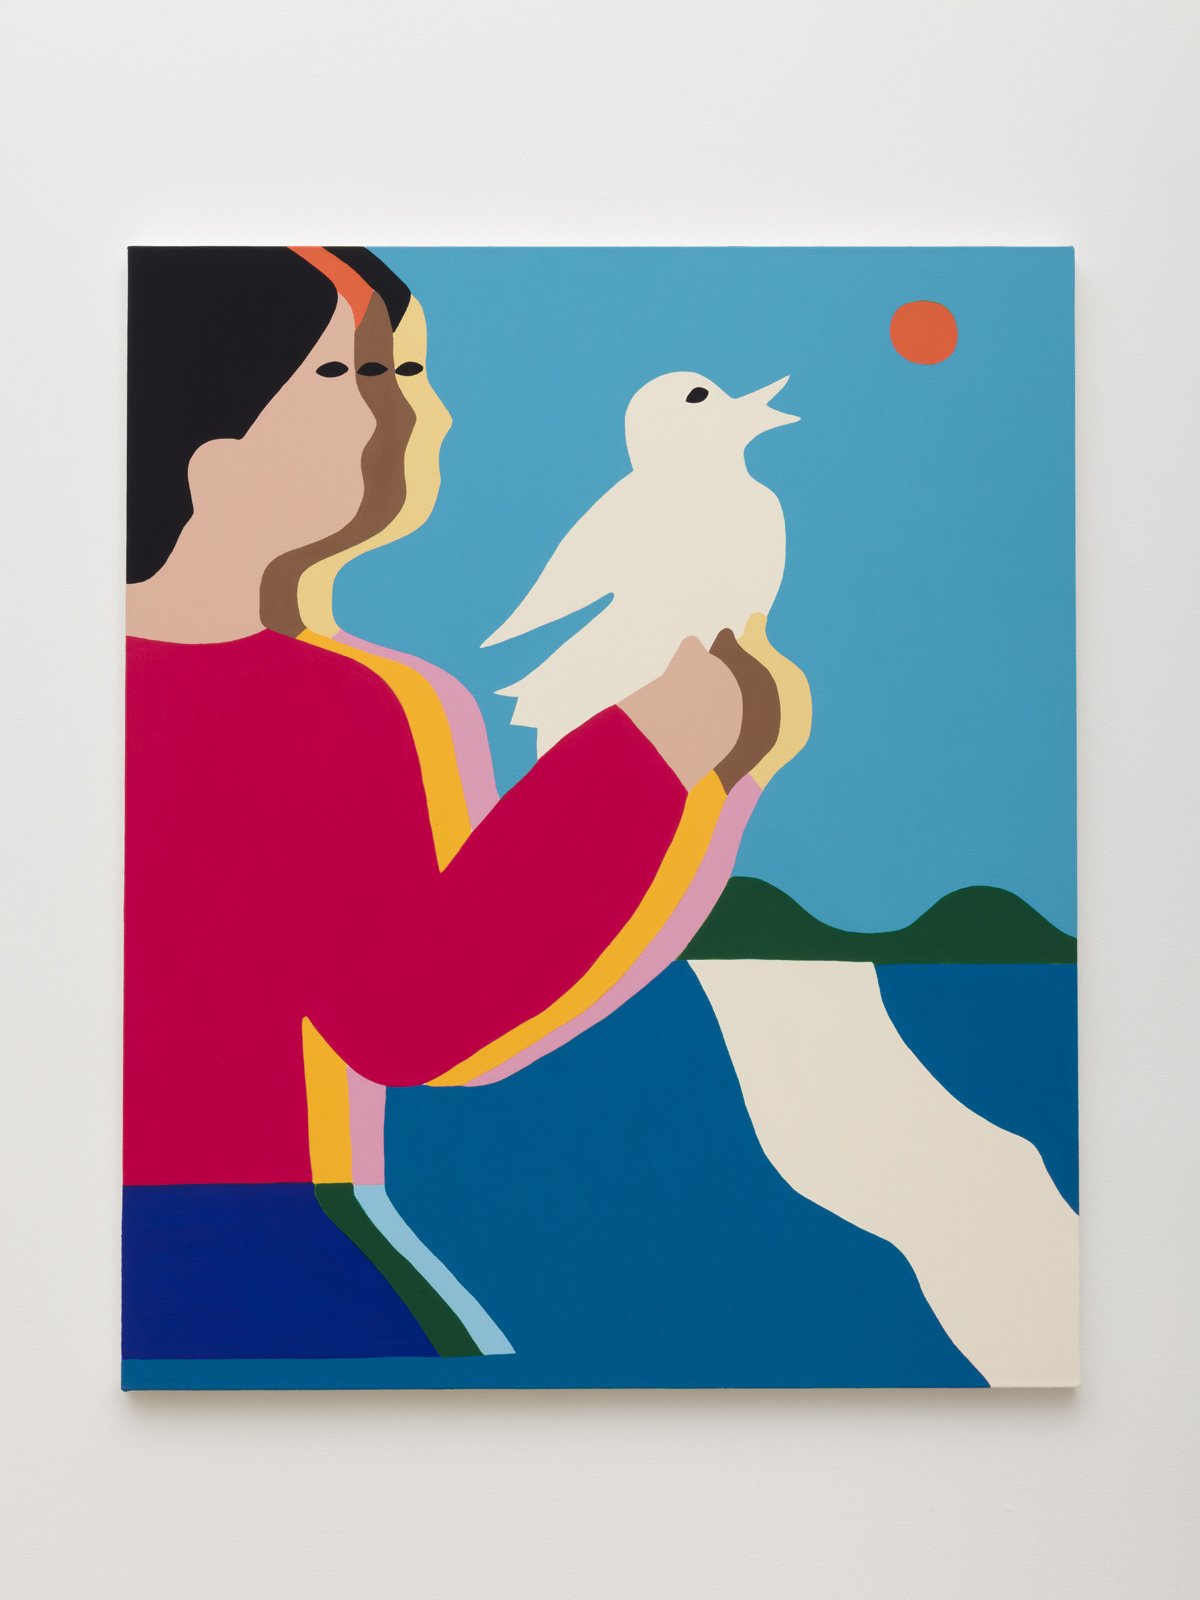  James Ulmer  Set Free, 2021  Flashe on canvas  42 x 35 in. 